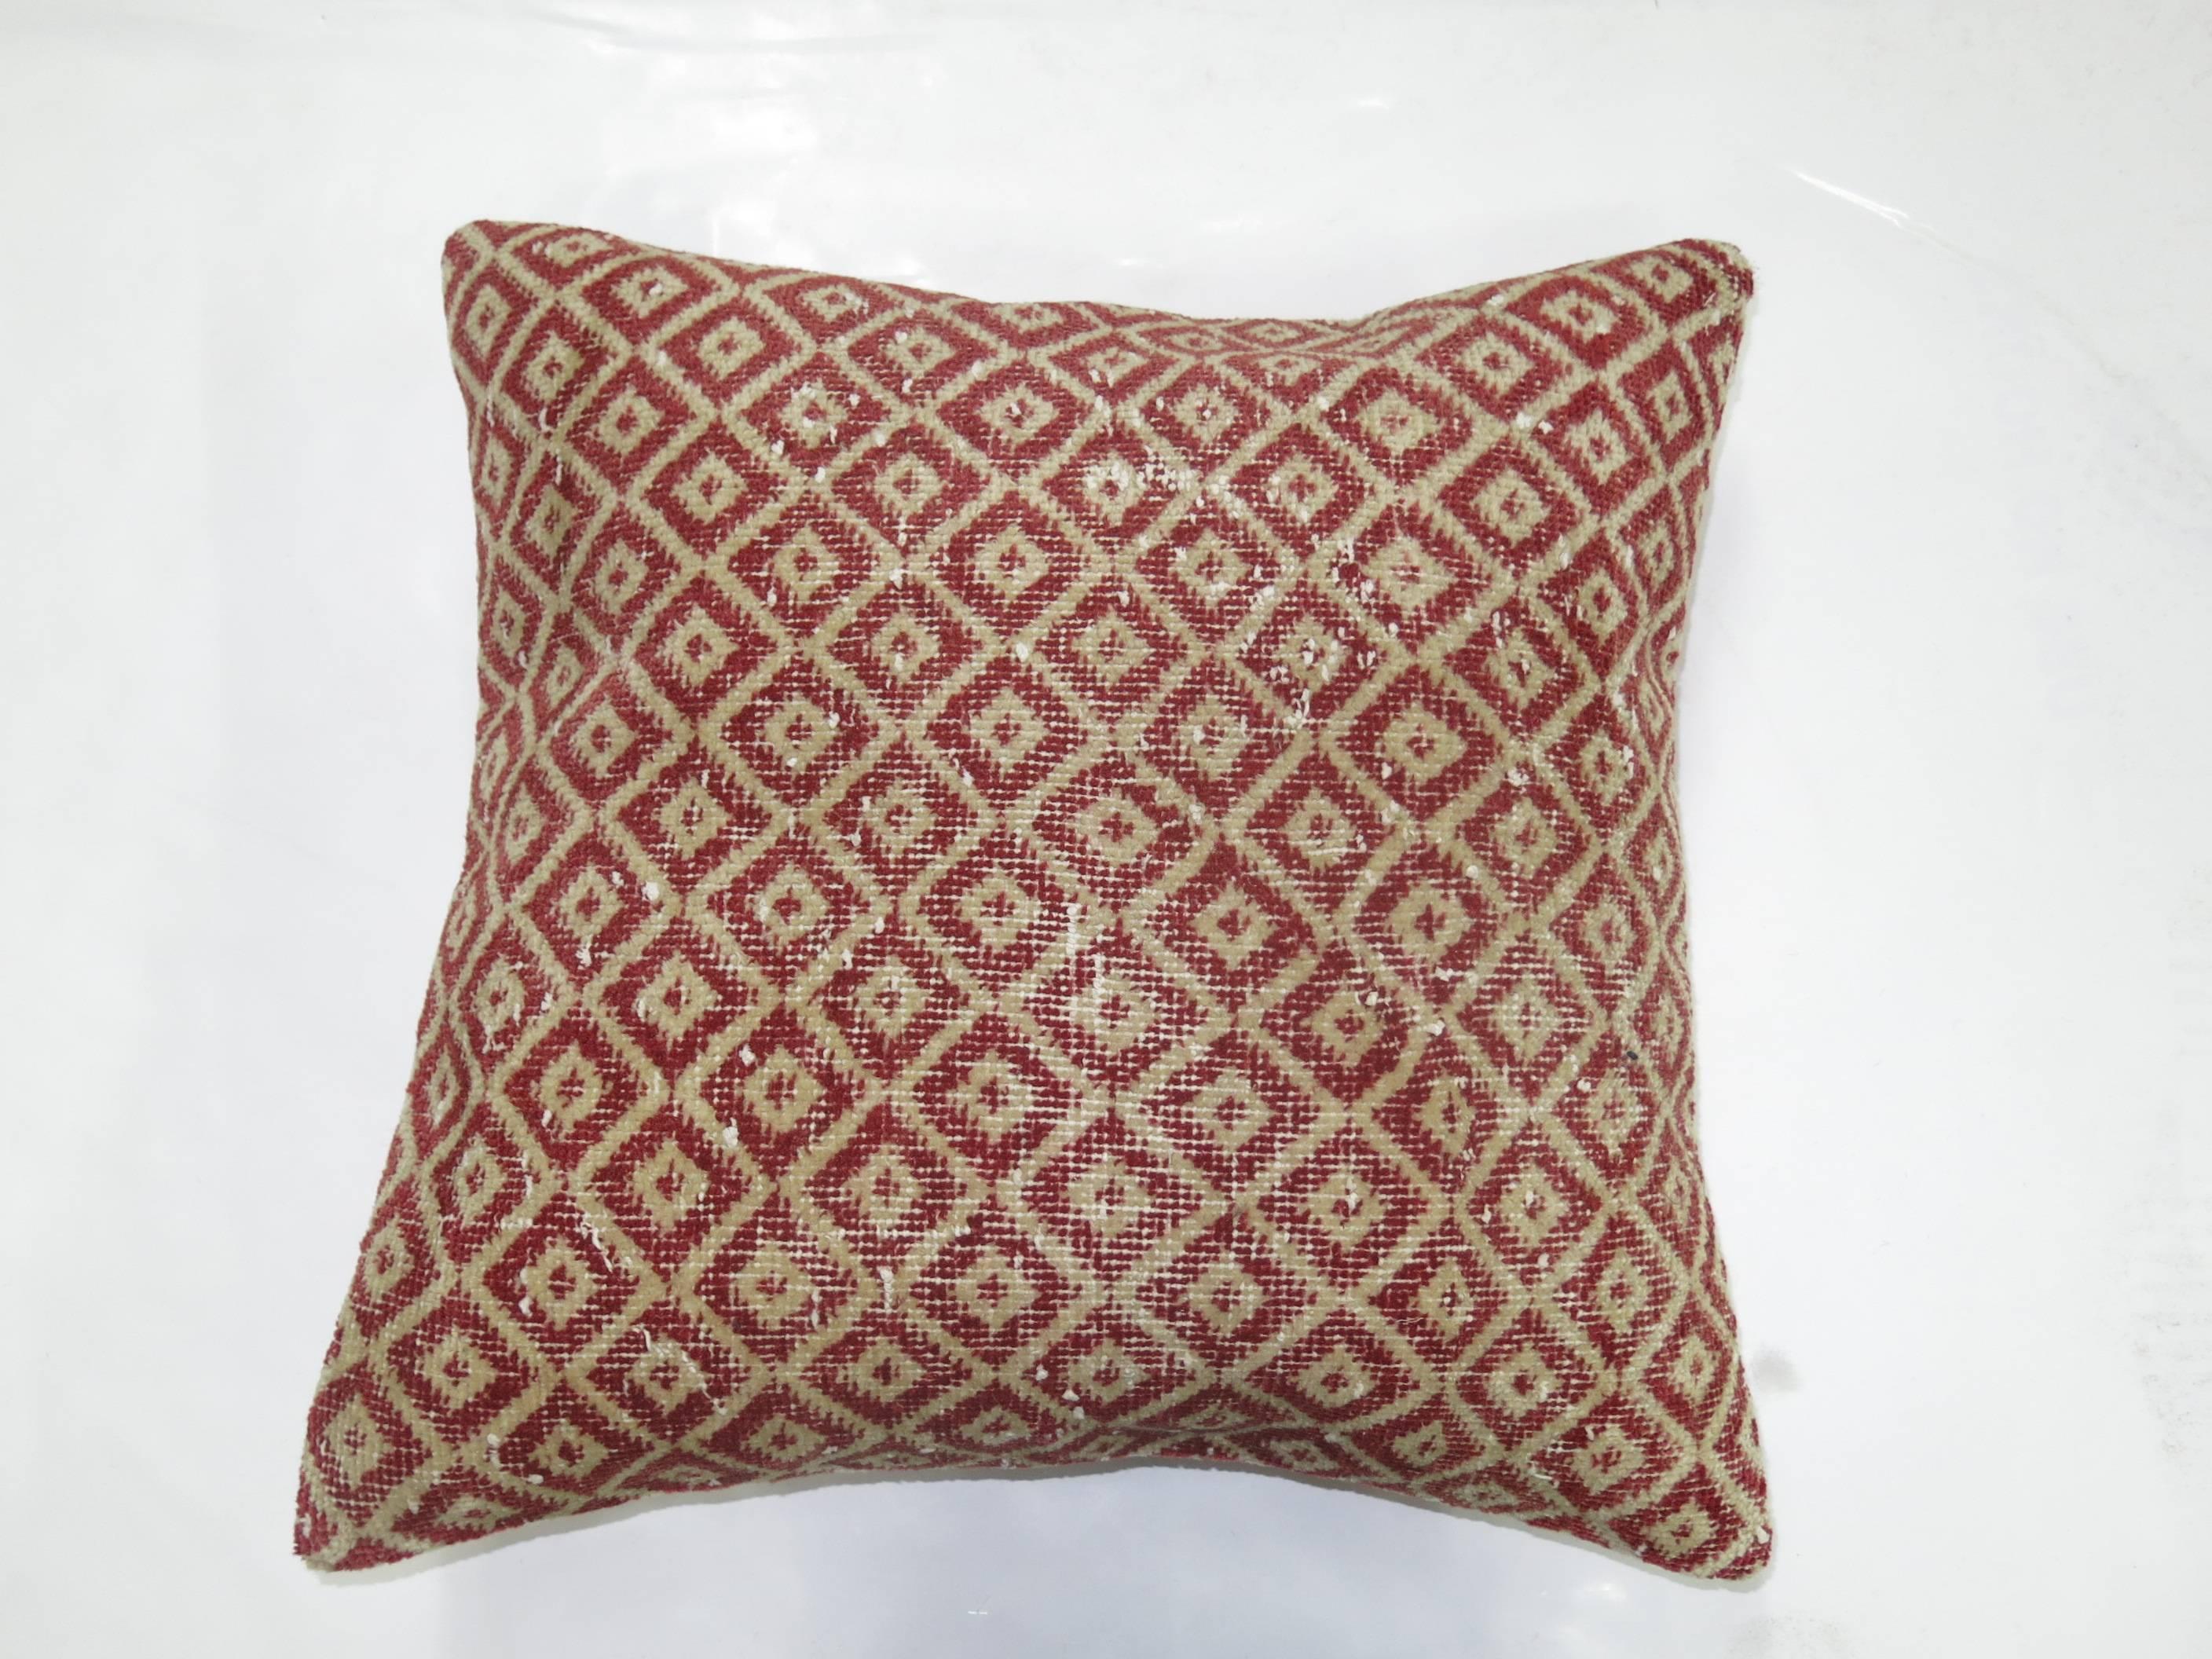 Pillow made from a Turkish Konya rug with pink linen backing and zipper closure.

17'' x 17''